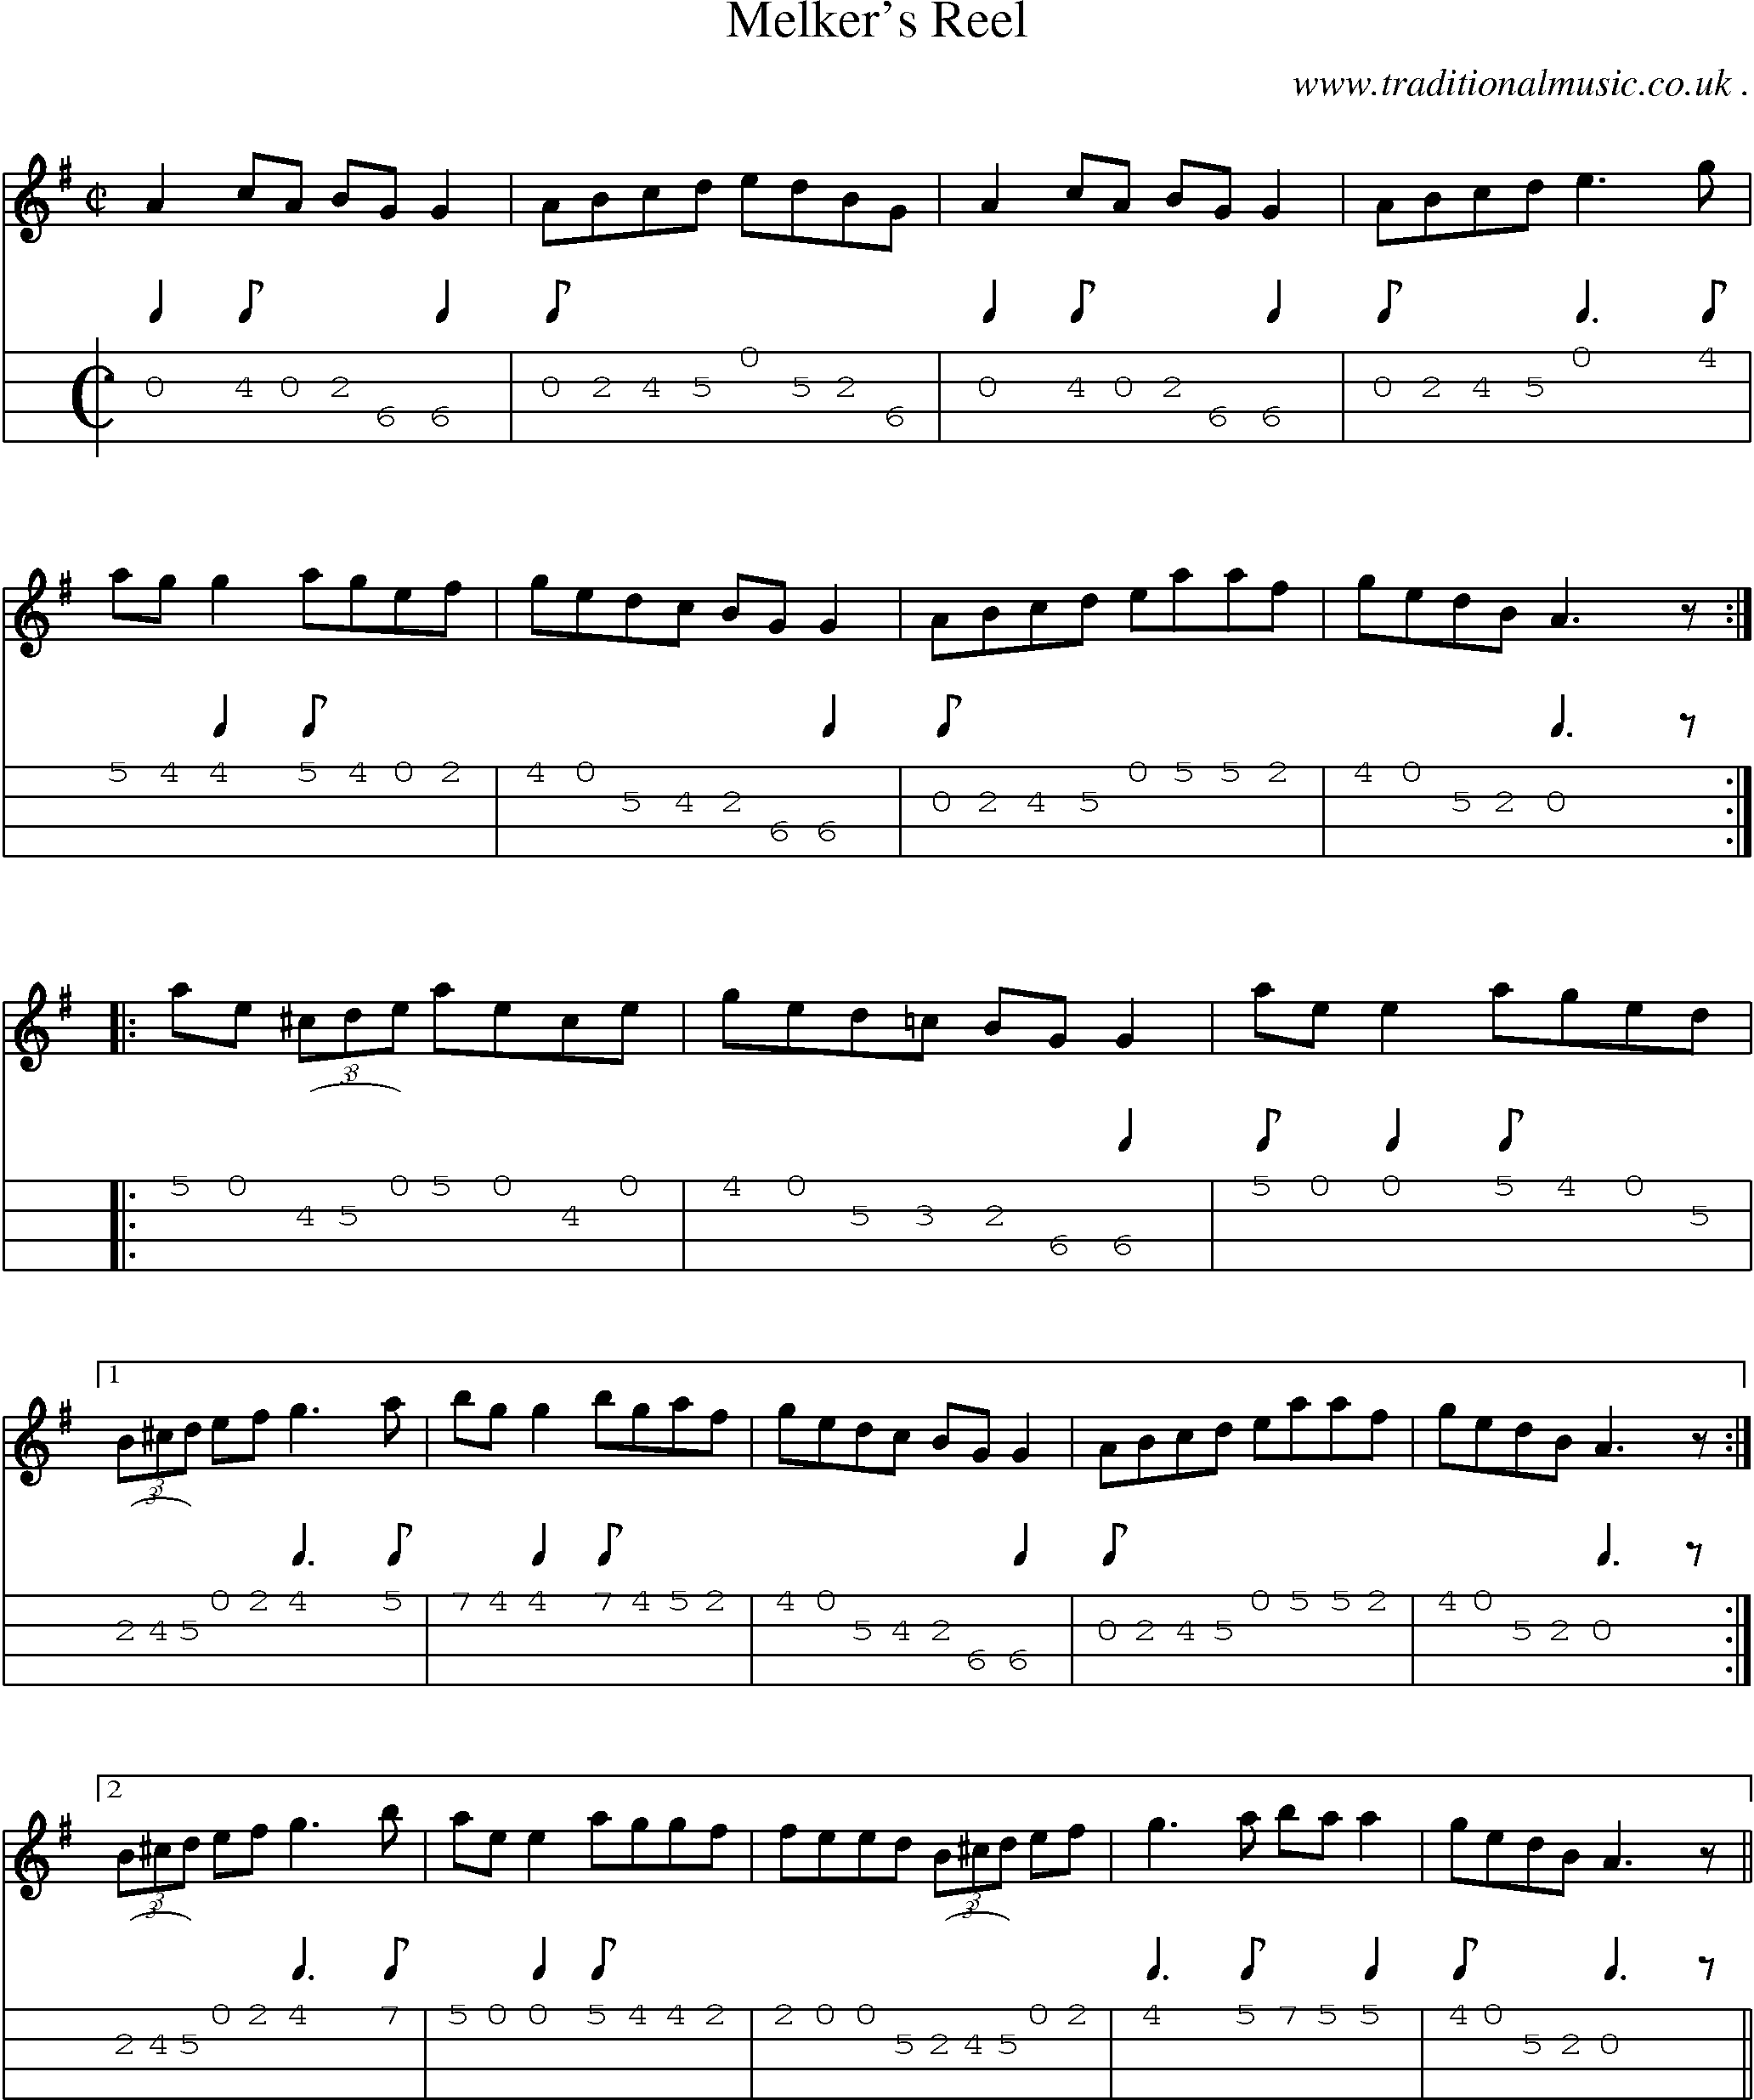 Sheet-Music and Mandolin Tabs for Melkers Reel